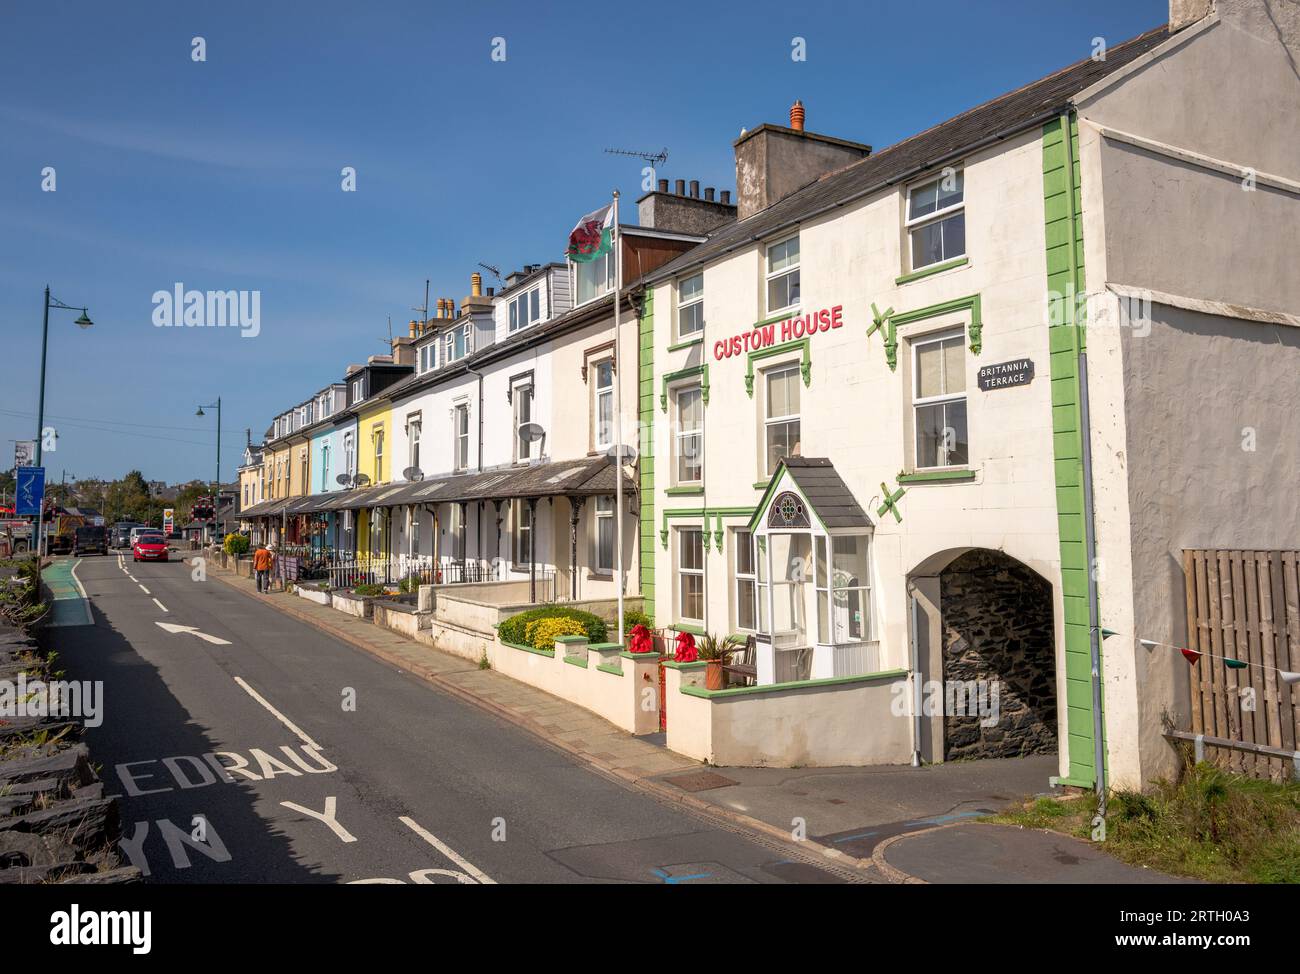 Row of pastel coloured terraced housing on the high street at Portmadoc, Gwynedd, Wales. Stock Photo